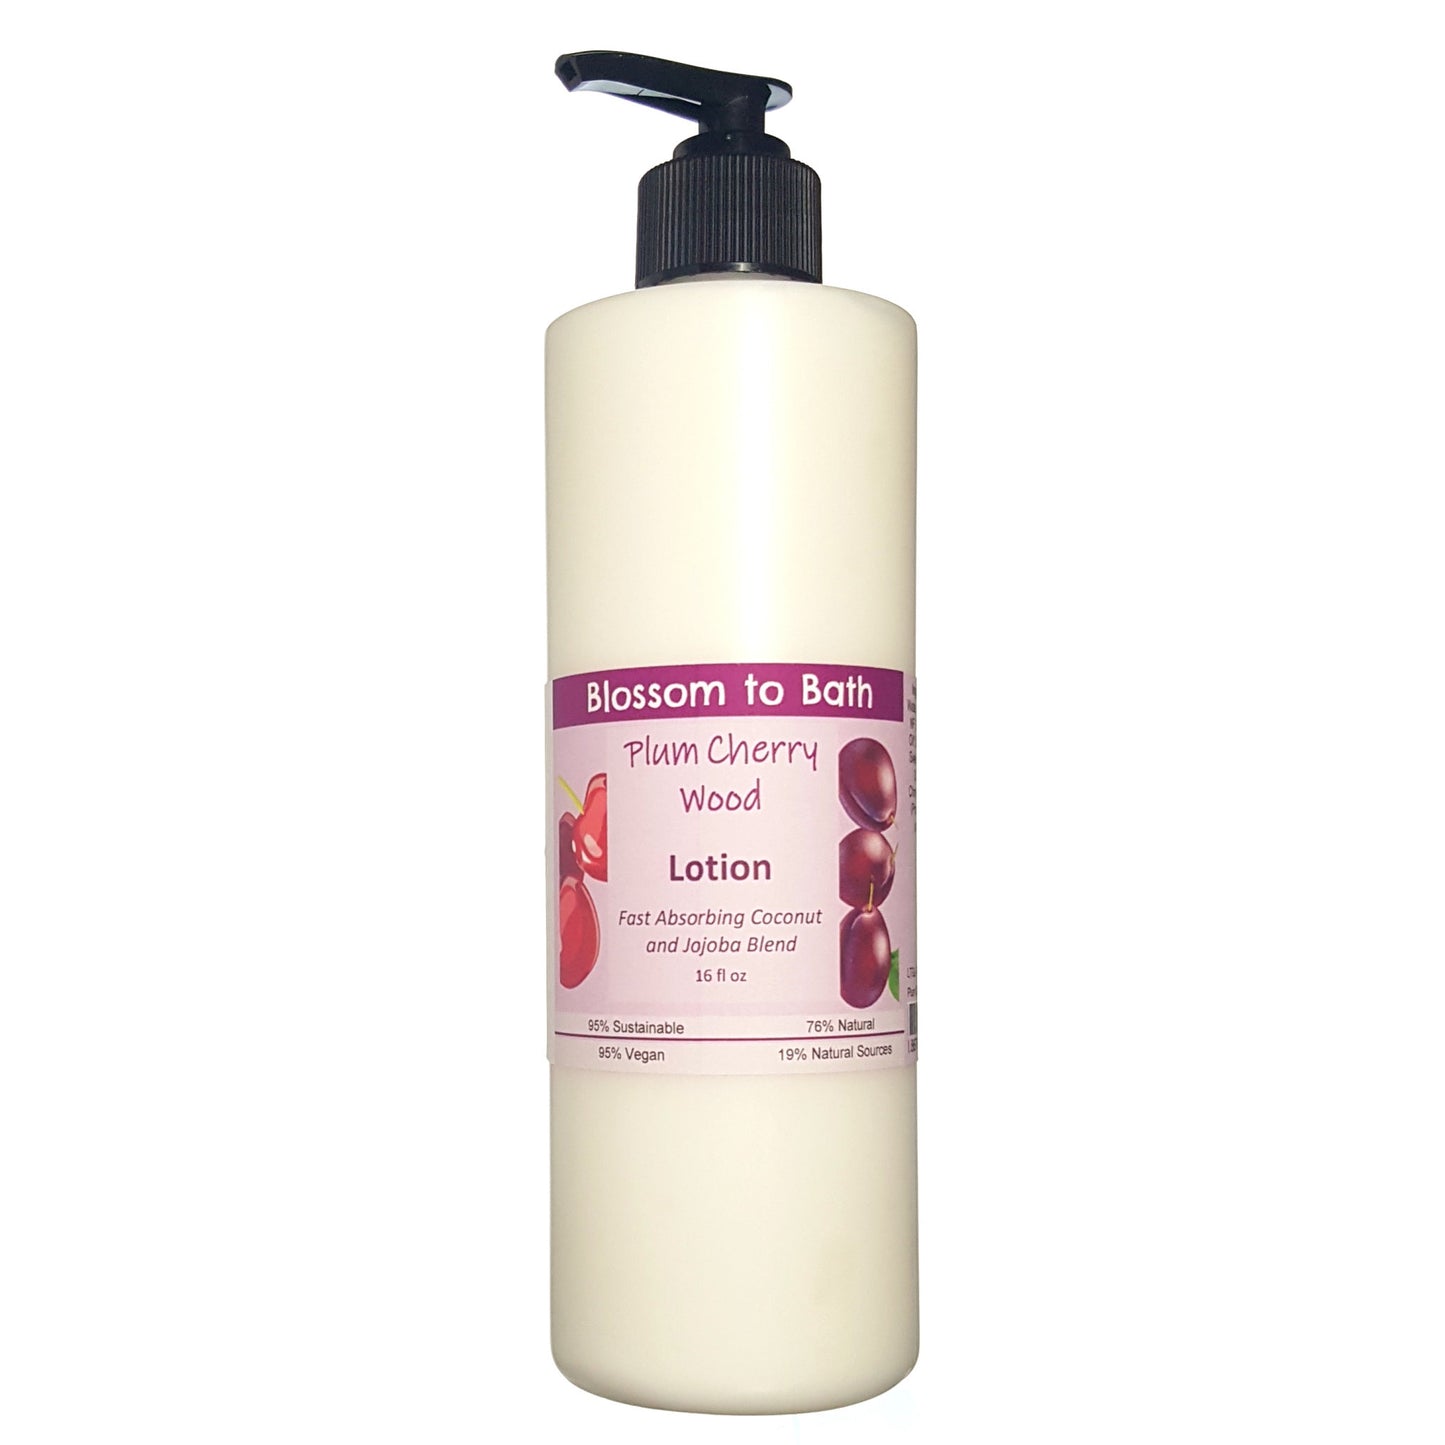 Buy Blossom to Bath Plum Cherry Wood Lotion from Flowersong Soap Studio.  Daily moisture luxury that soaks in quickly made with organic oils and butters that soften and smooth the skin  A charmingly sweet and woodsy fragrance.